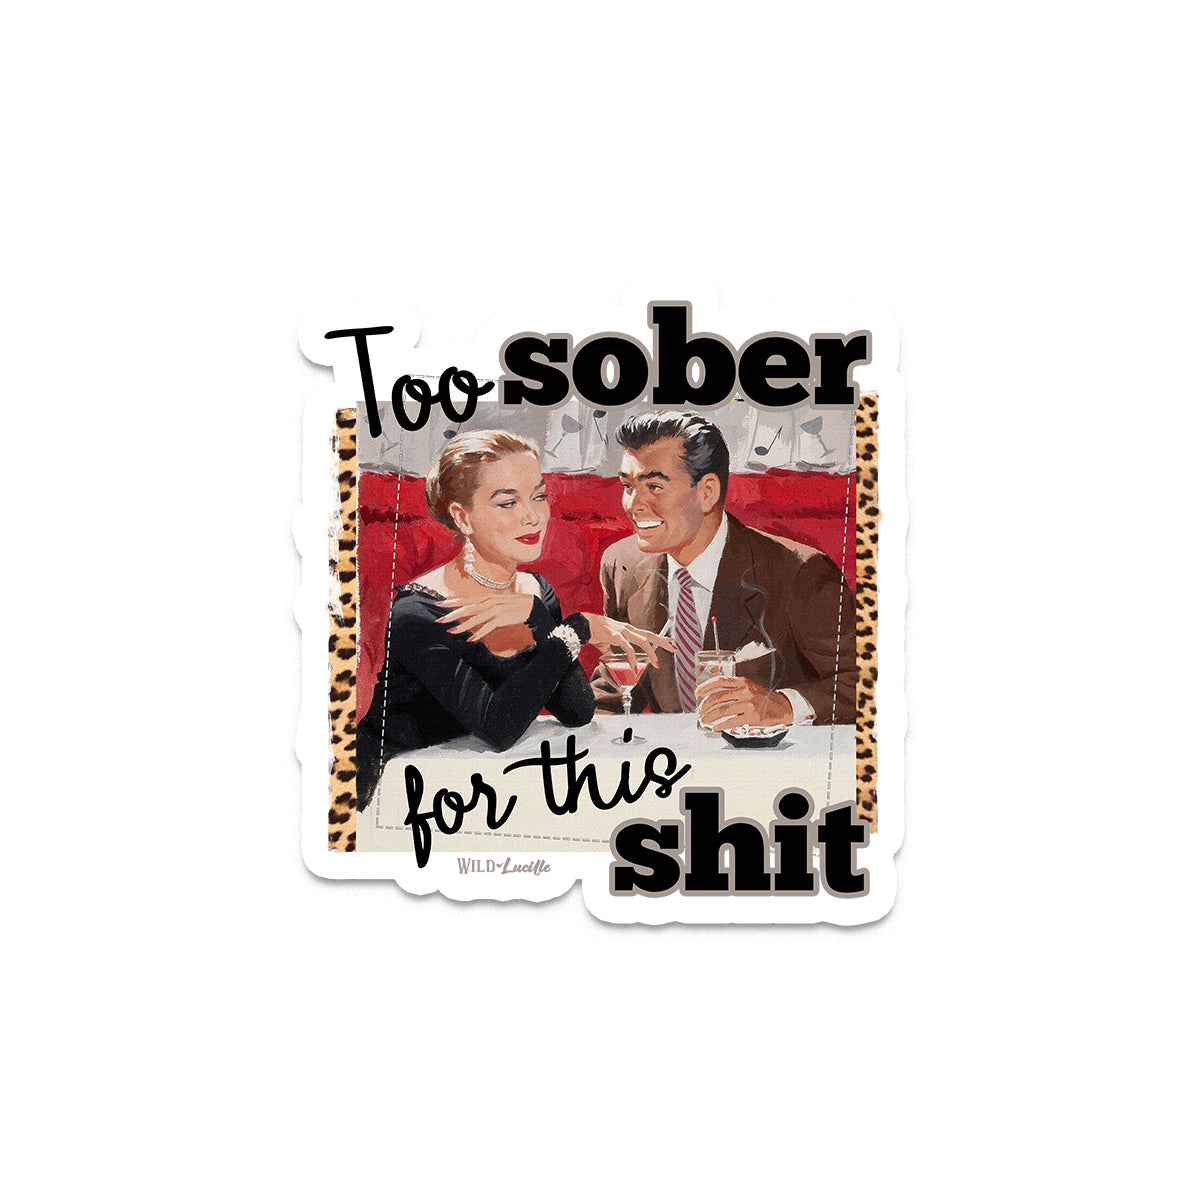 Too Sober For This Shit - Sassy Retro Vinyl Sticker Decals